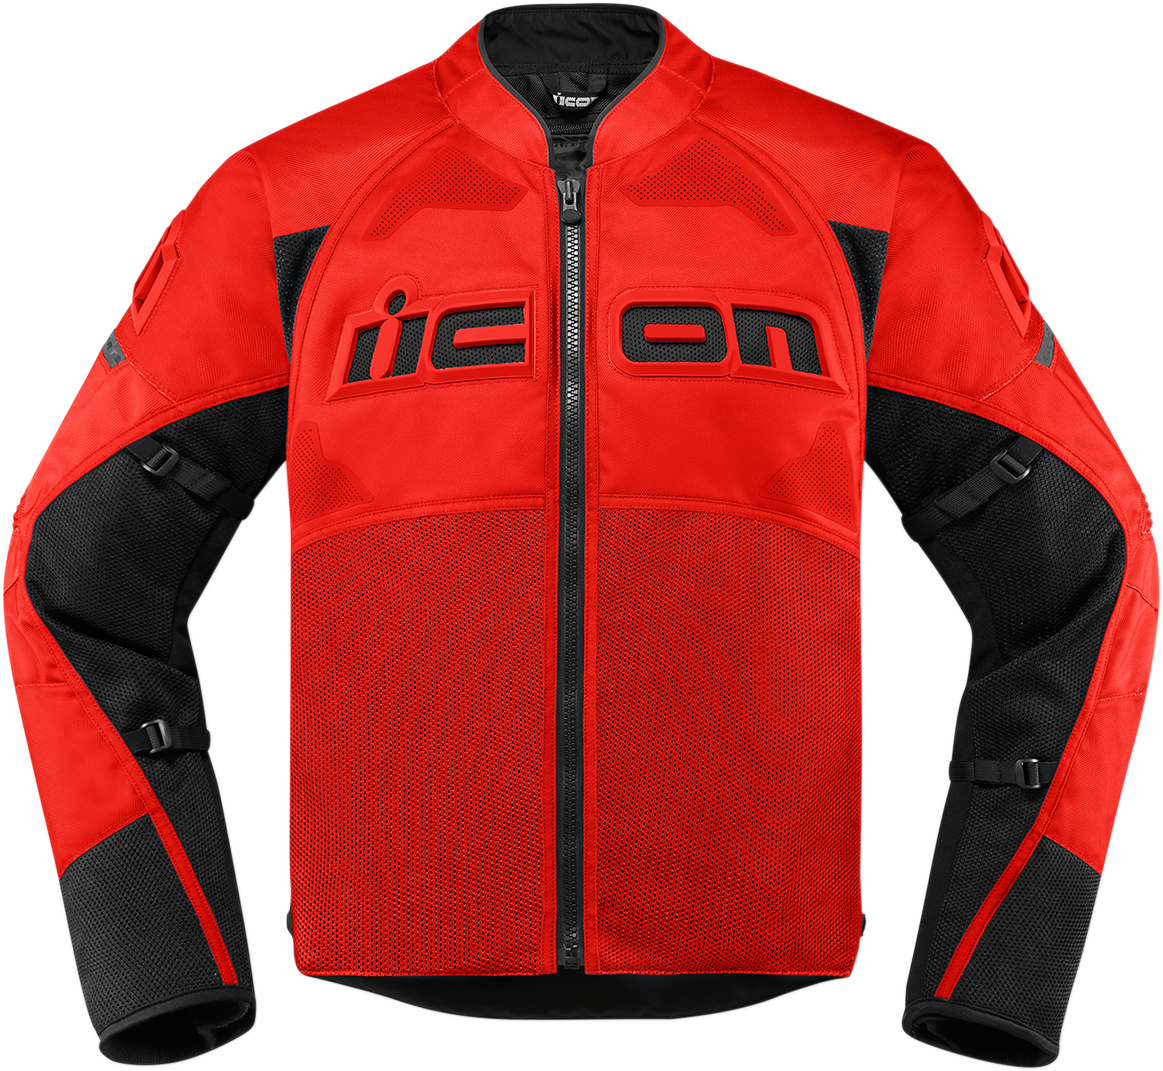 ICON Contra2™ Jacket - Red - XL 2820-4774